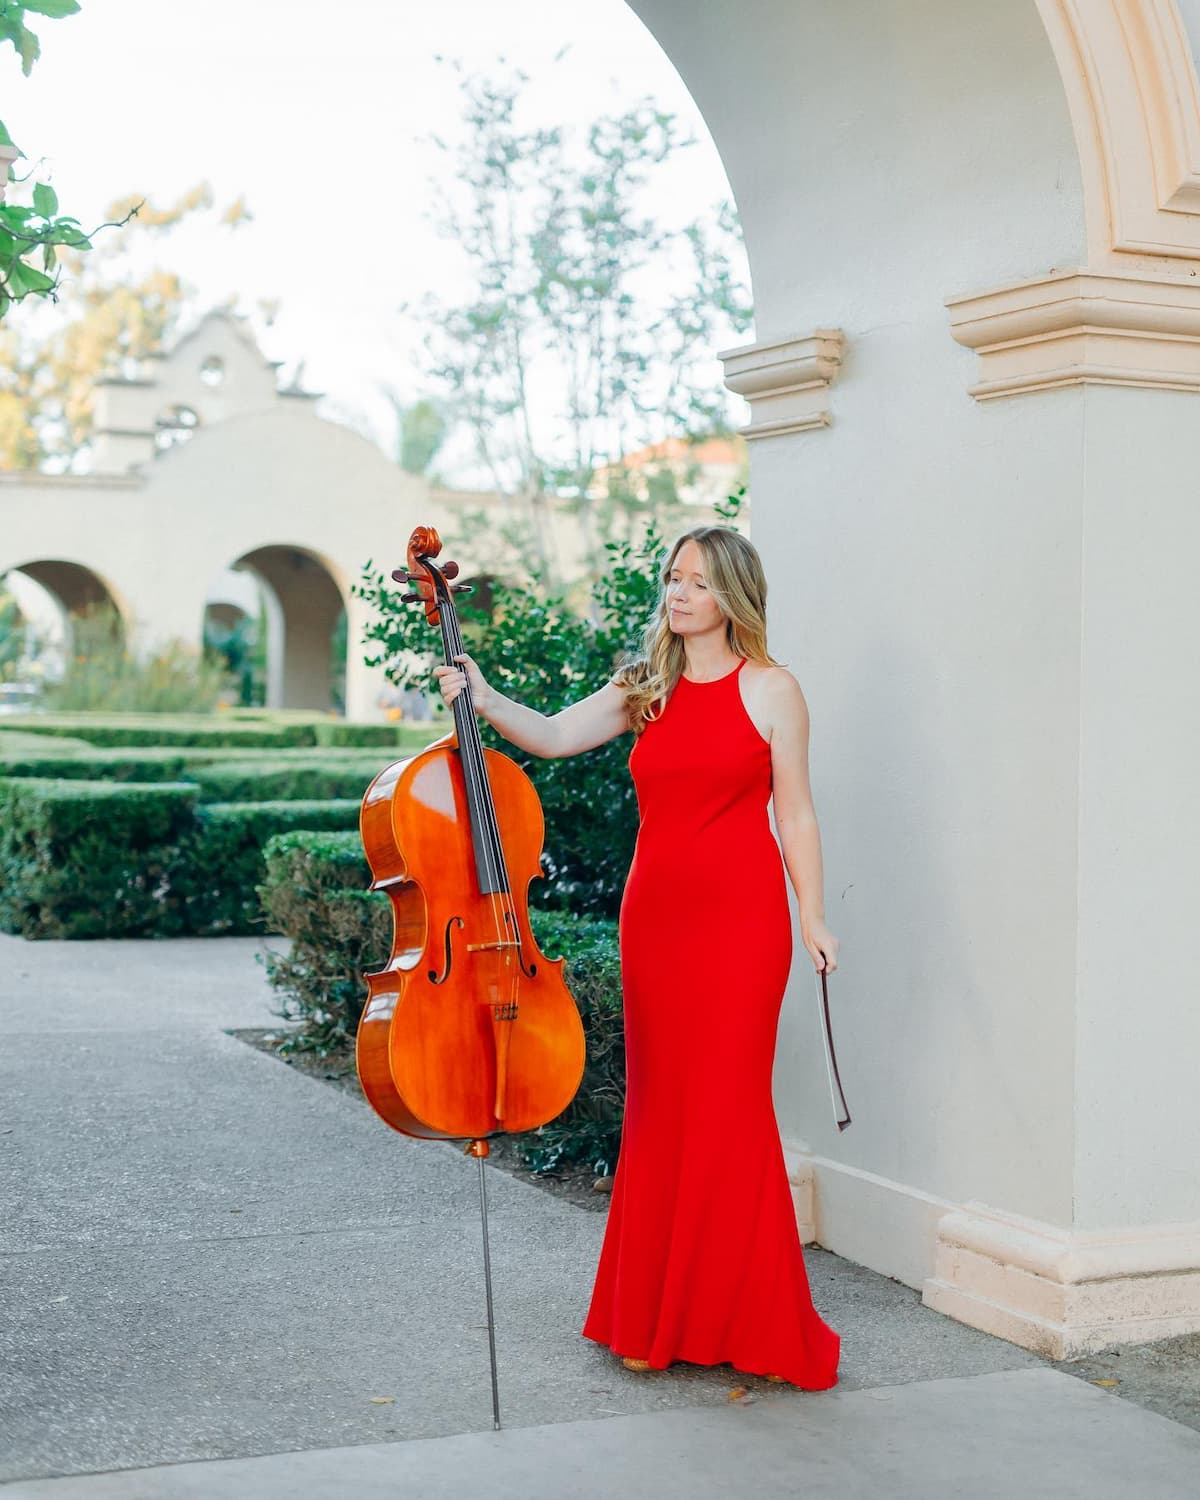 Sophie Webber with her cello